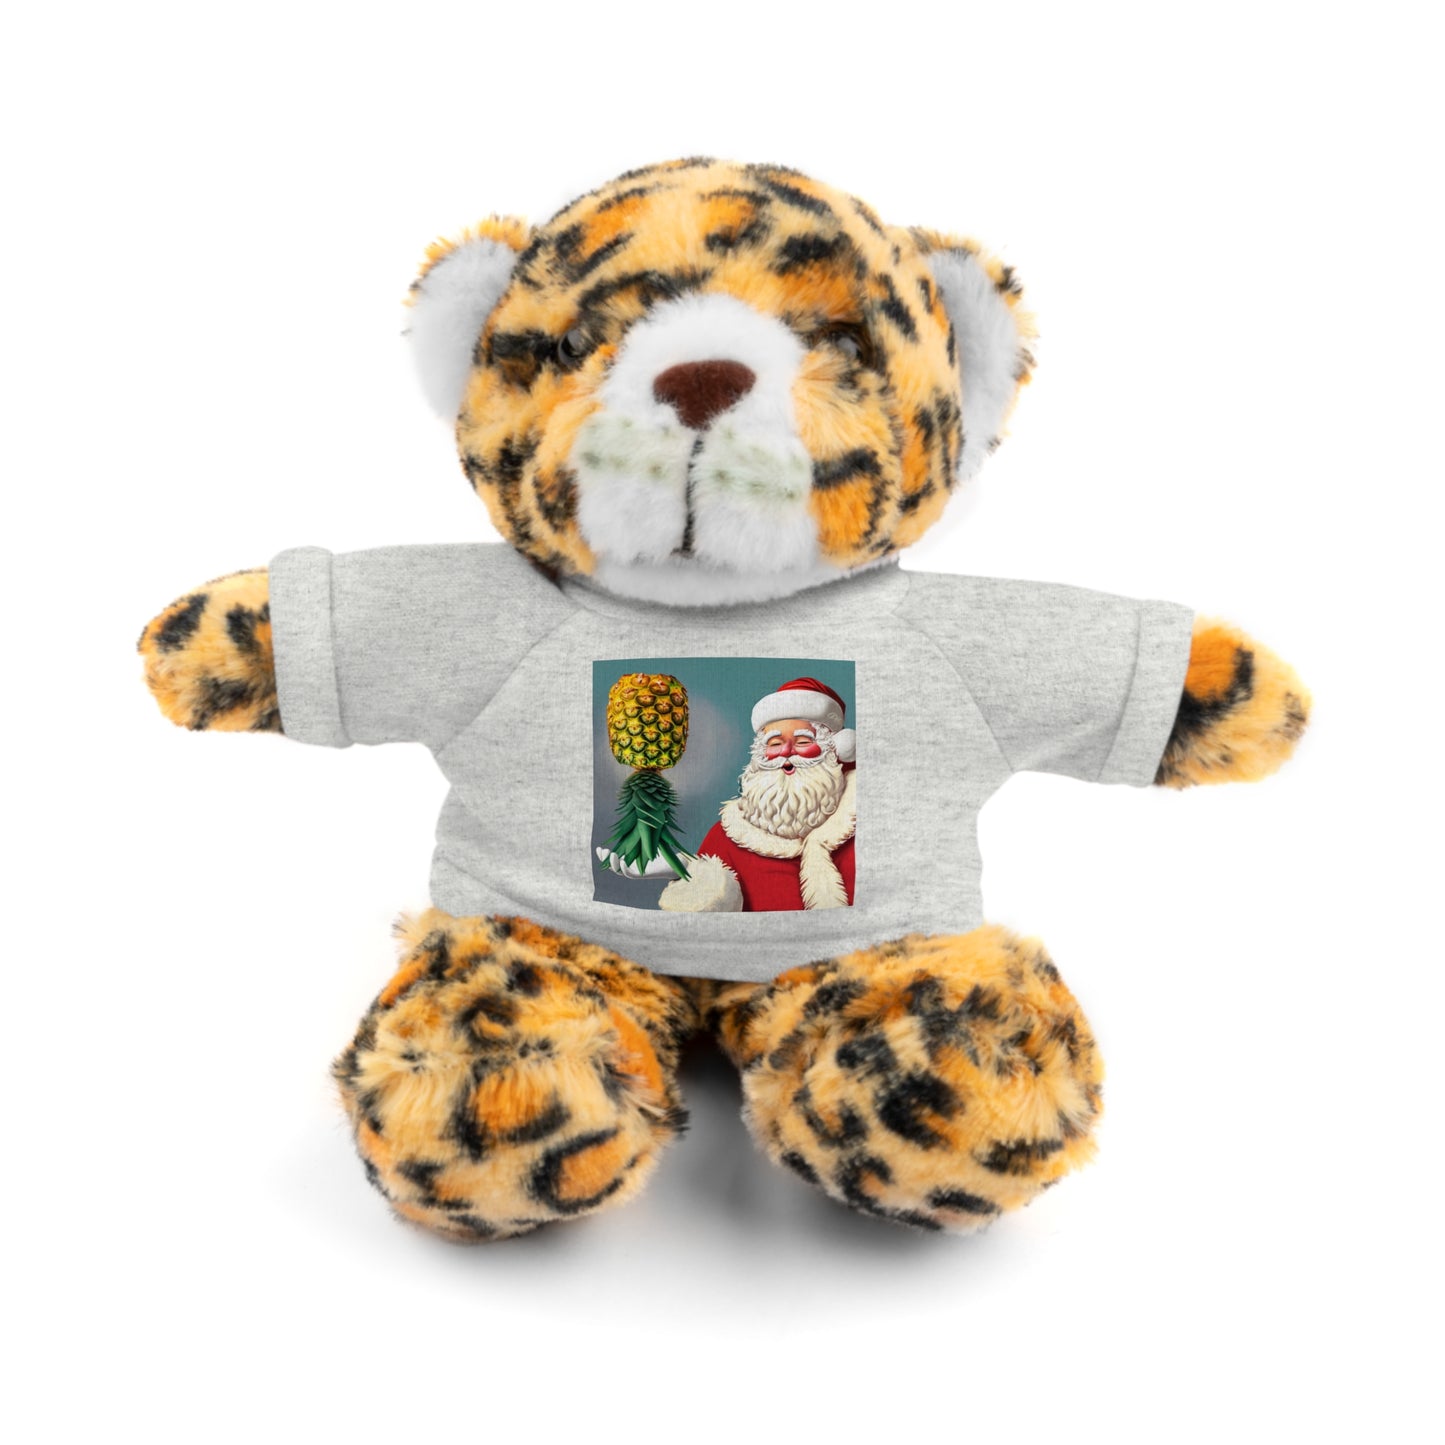 Upside Down Pineapple Santa Claus Christmas Swinger Stuffed Animals with Tee, If You Know You Know, Adult Party Gift